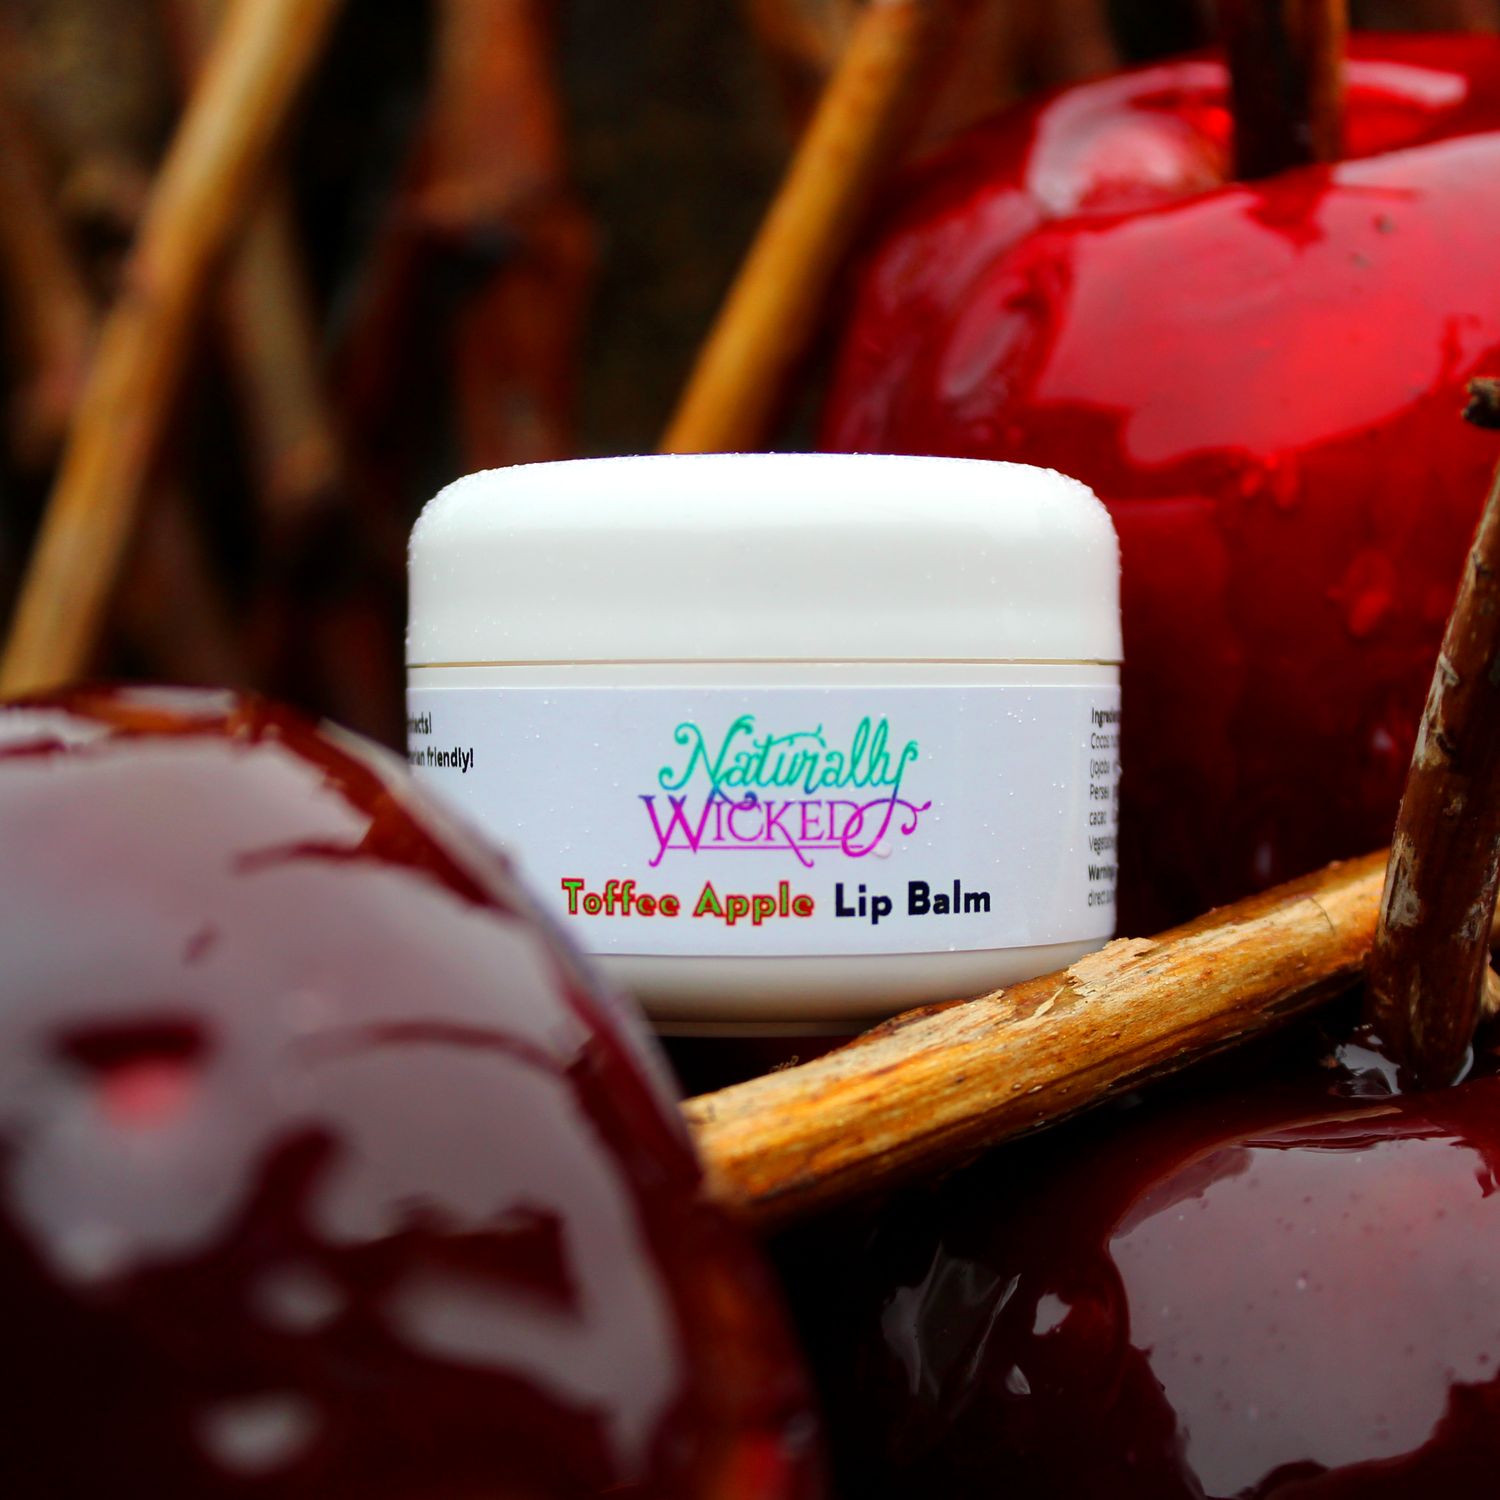 Naturally Wicked Toffee Apple Lip Balm In Between Several Brown Sticks & Red Coloured Toffee Apples